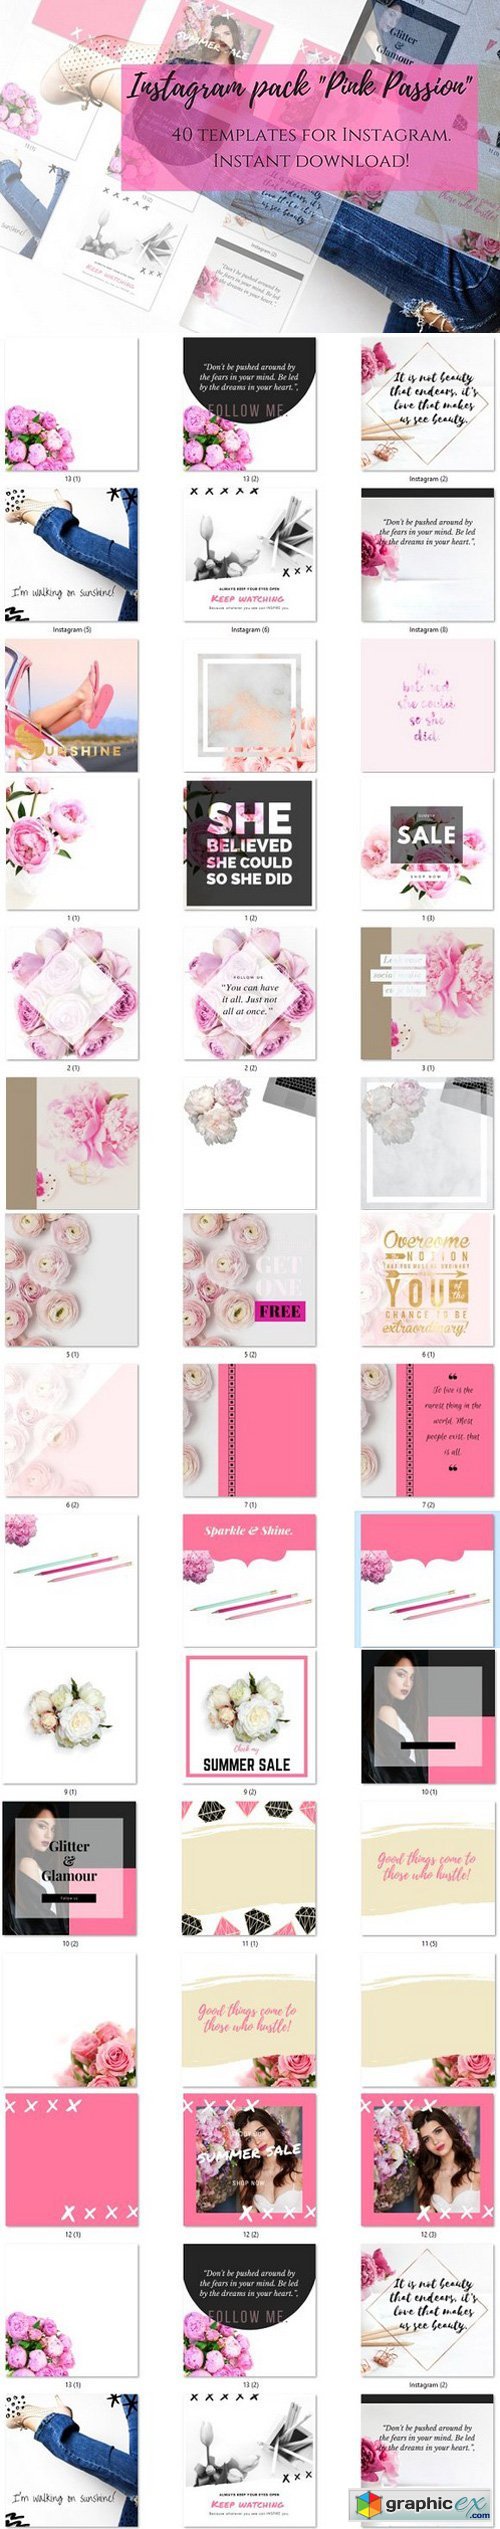 Instagram pack "Pink Passion"